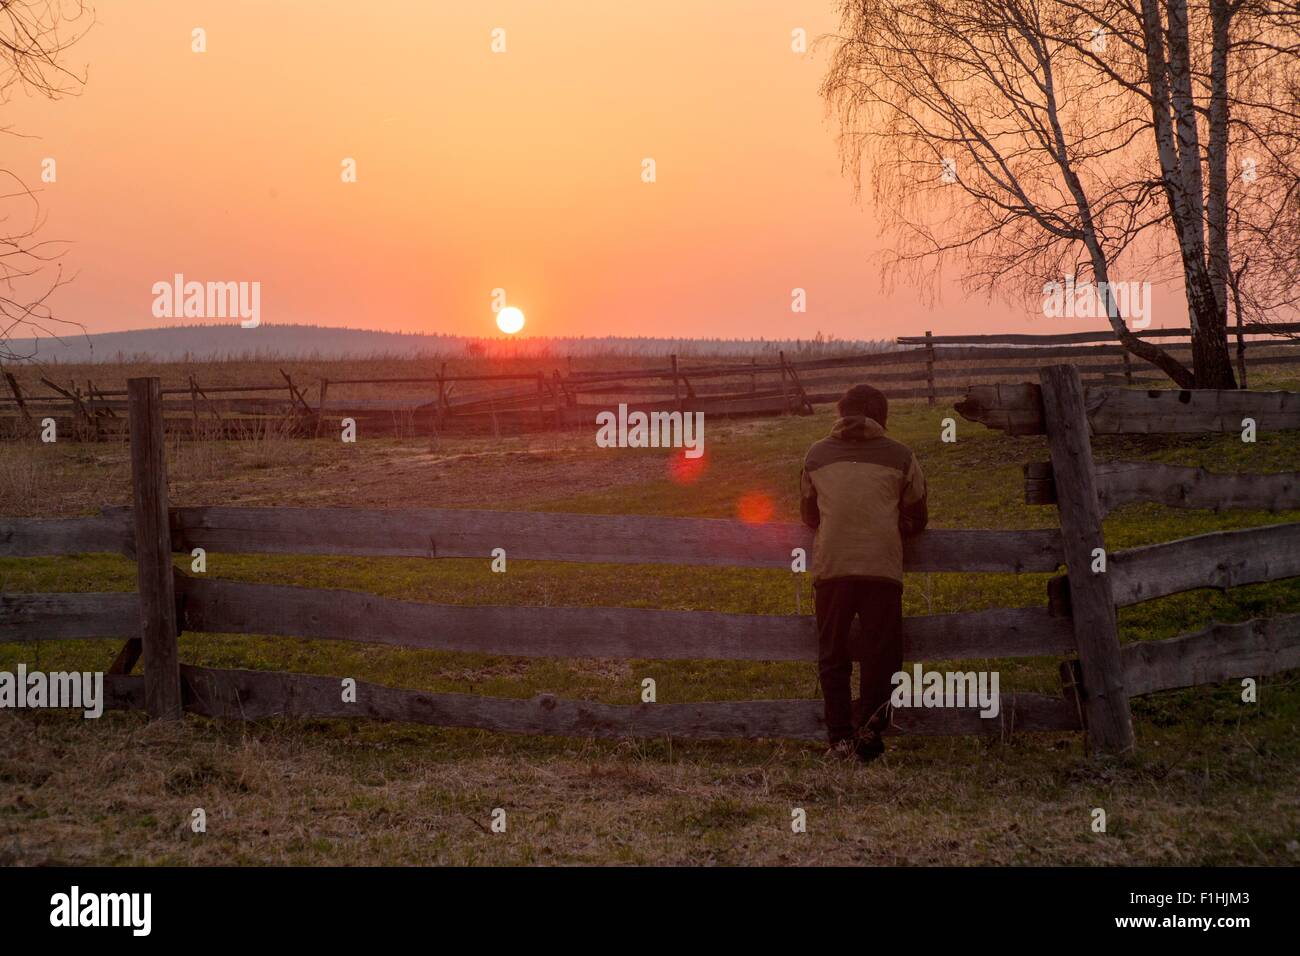 Mid adult man leaning on fence in field, watching the sun set, rear view Stock Photo